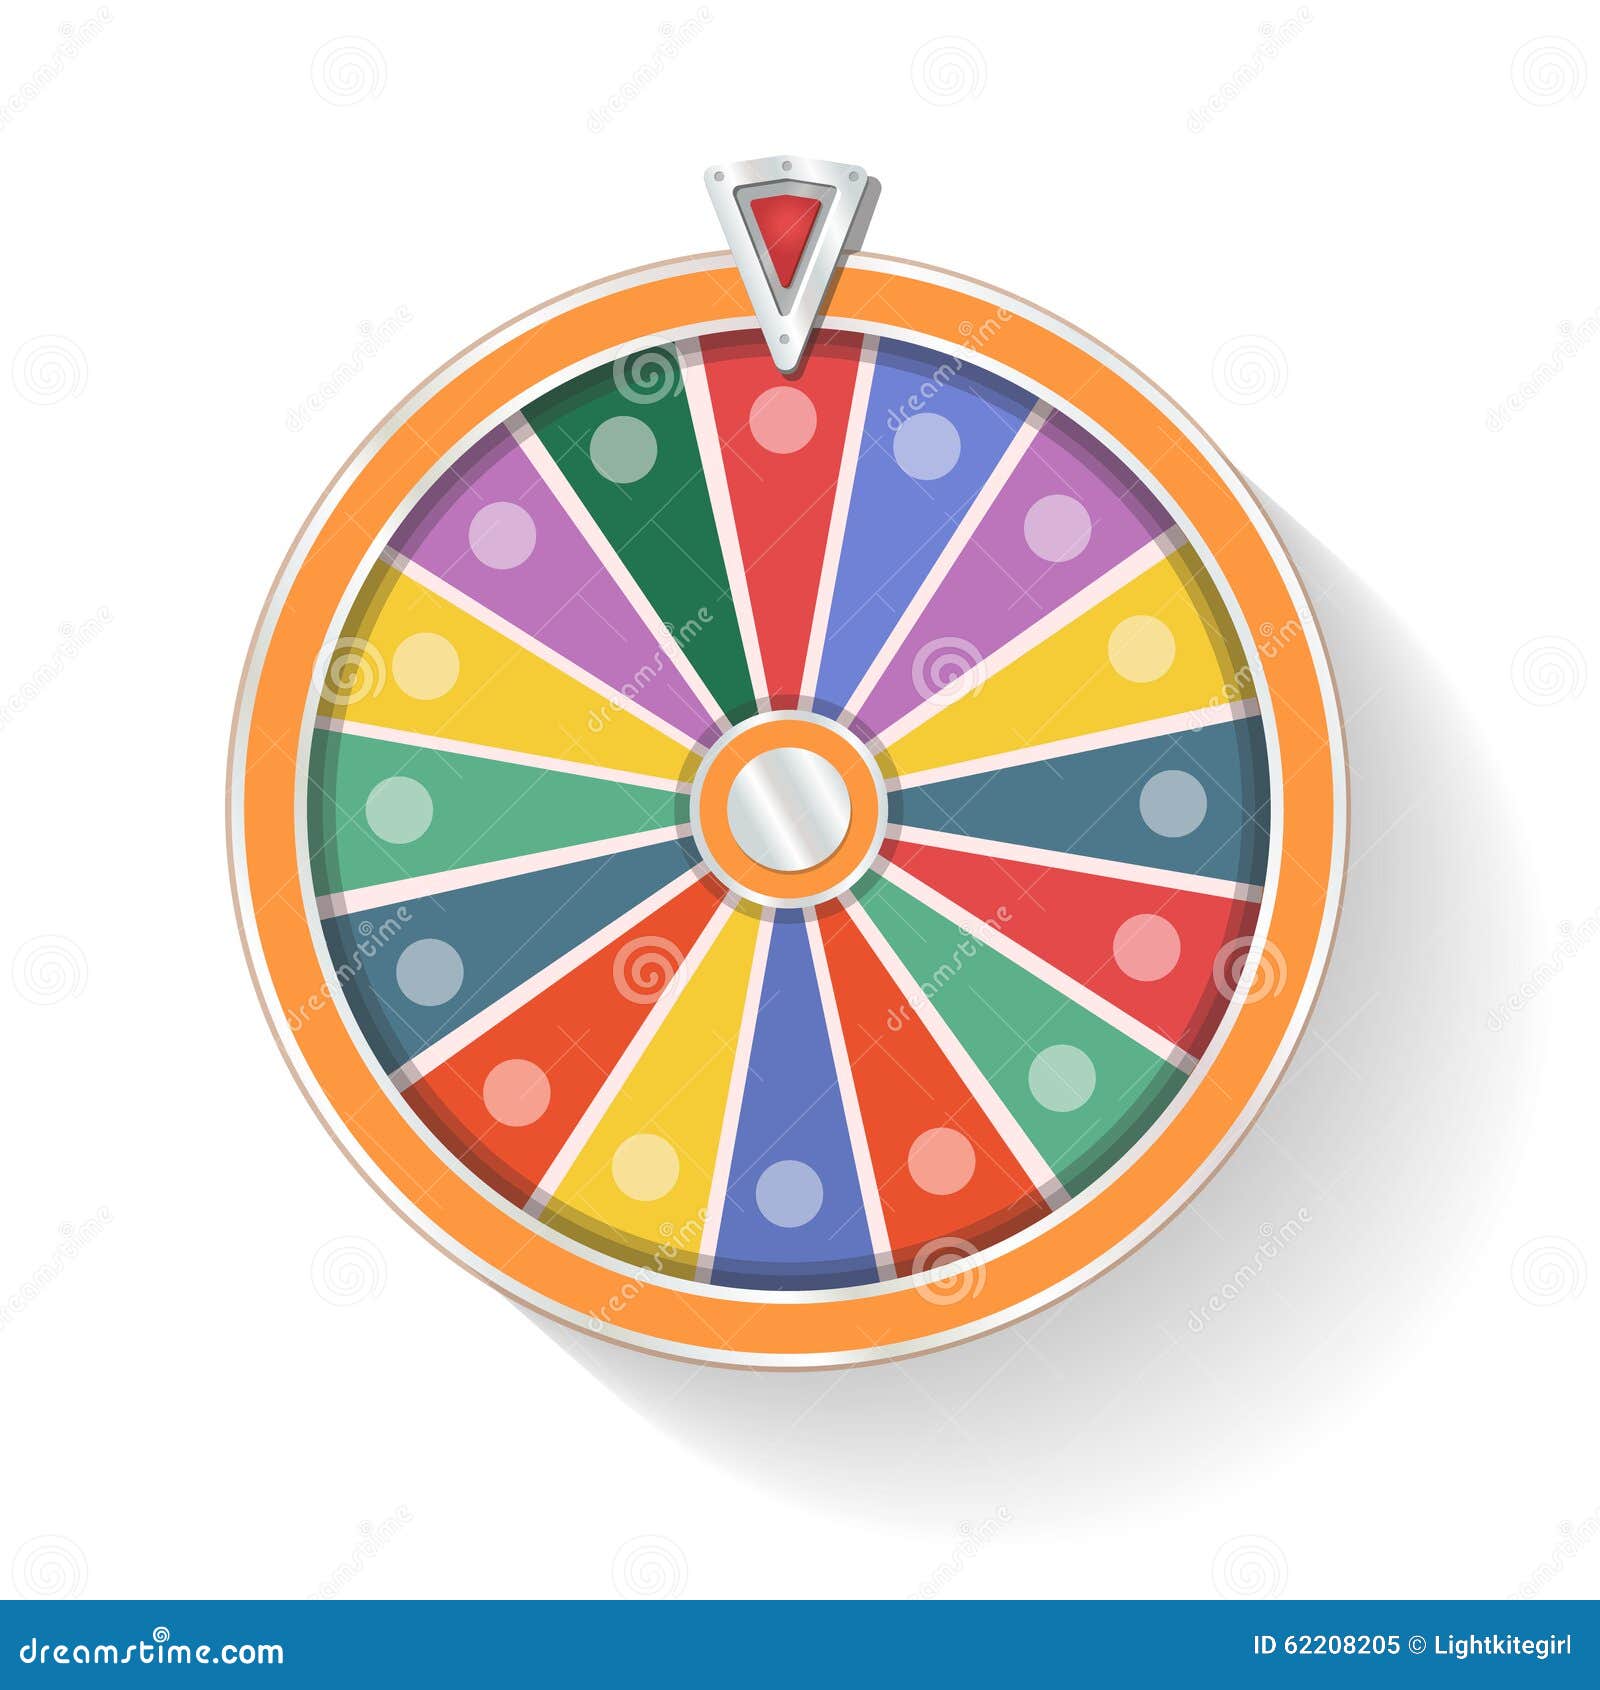 Colorful Wheel Of Fortune Stock Vector - Image: 622082051300 x 1390